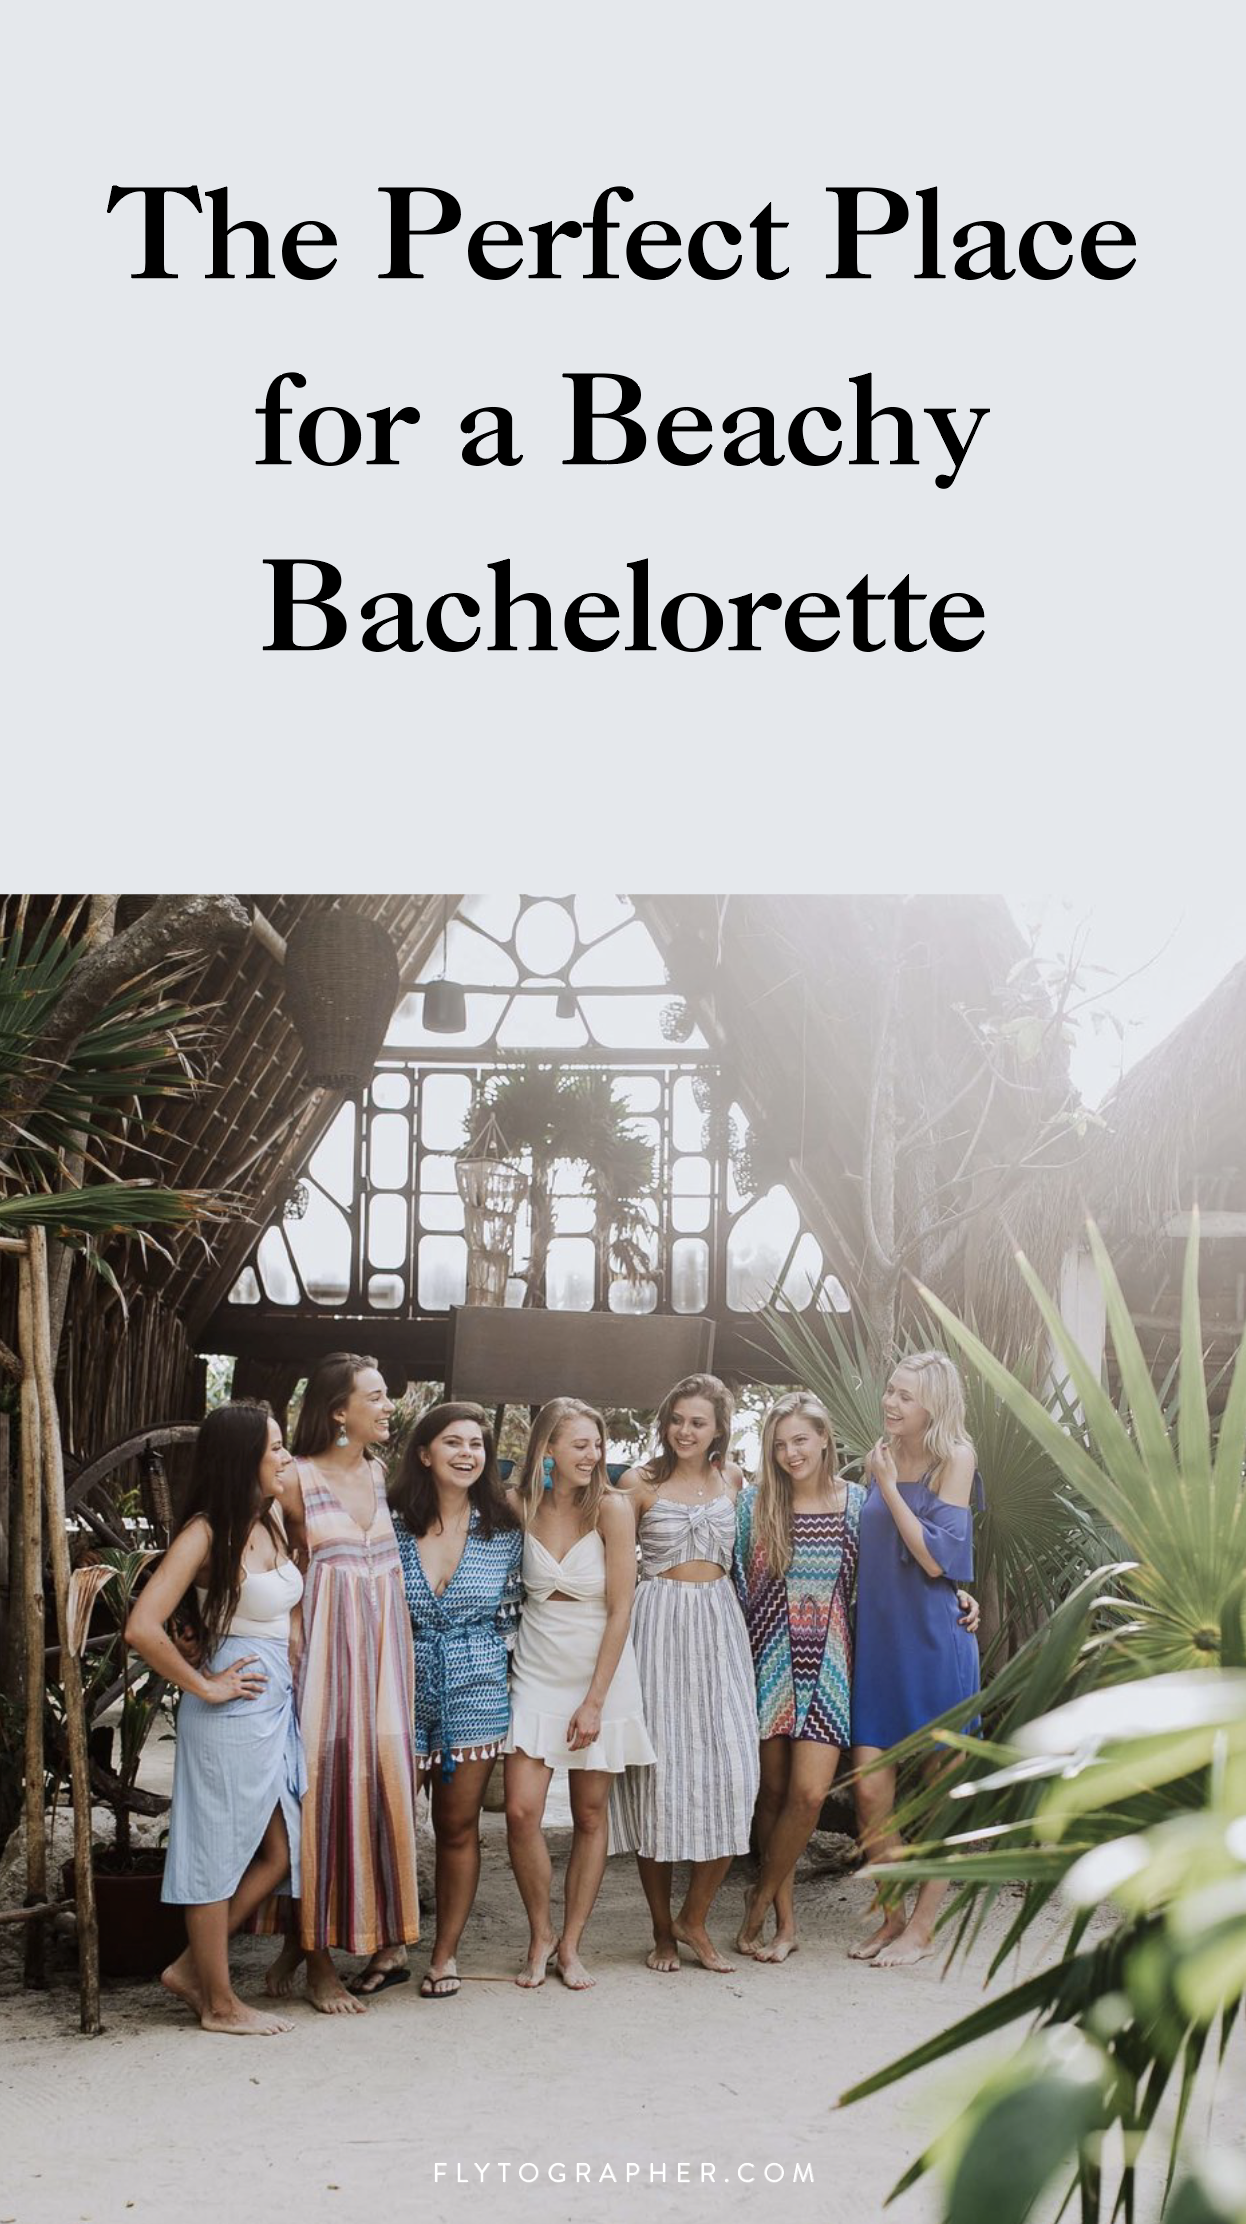 Cape May is the new spot for bachelorette parties